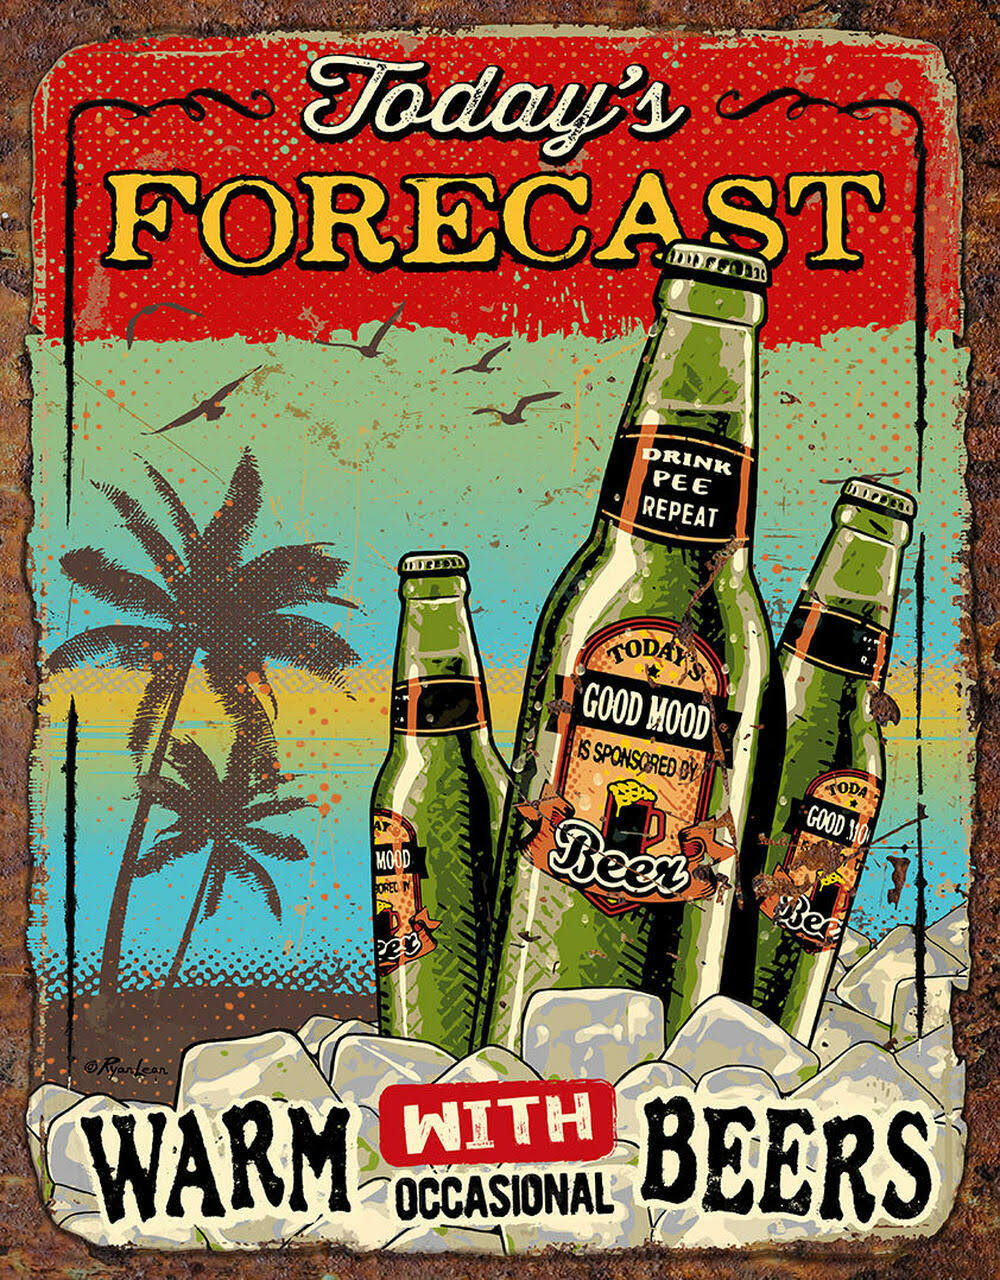 Today's Forecast Beers 12.5" x 16" Metal Wall Sign - 2577